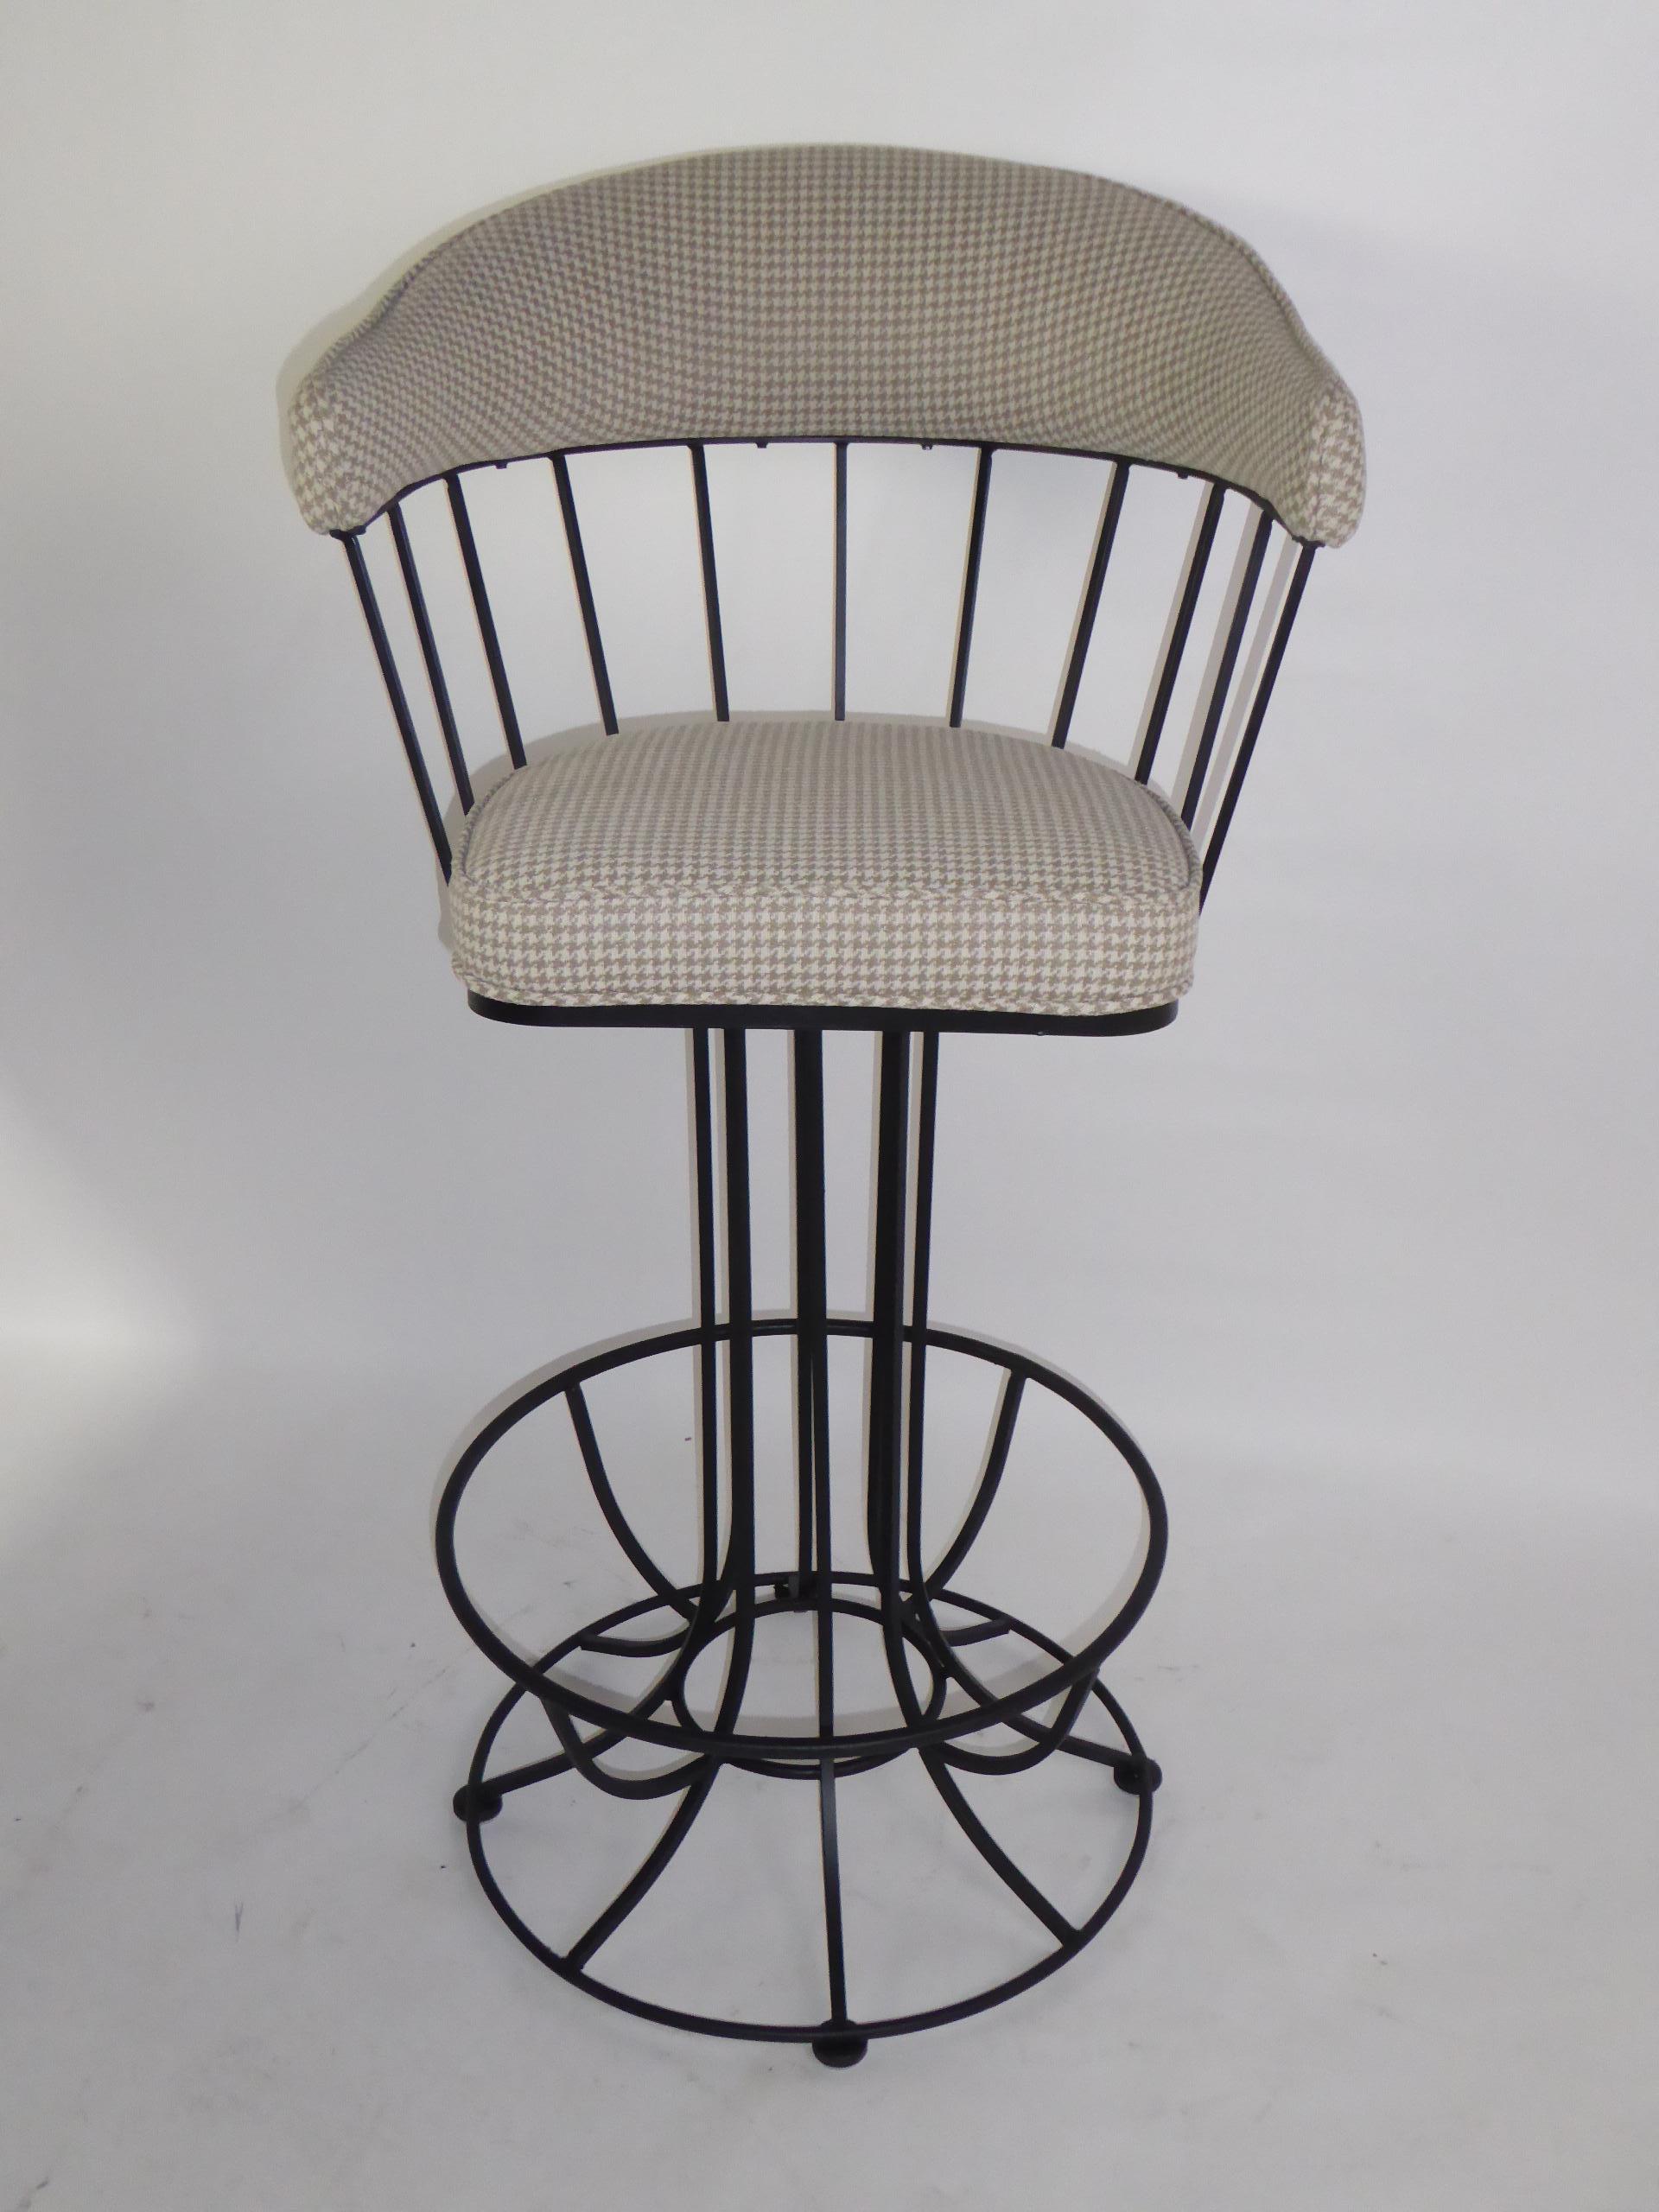 American Four 1960s Swiveling Bar Stools Upholstered in Houndstooth Anton Lorenz Inspired